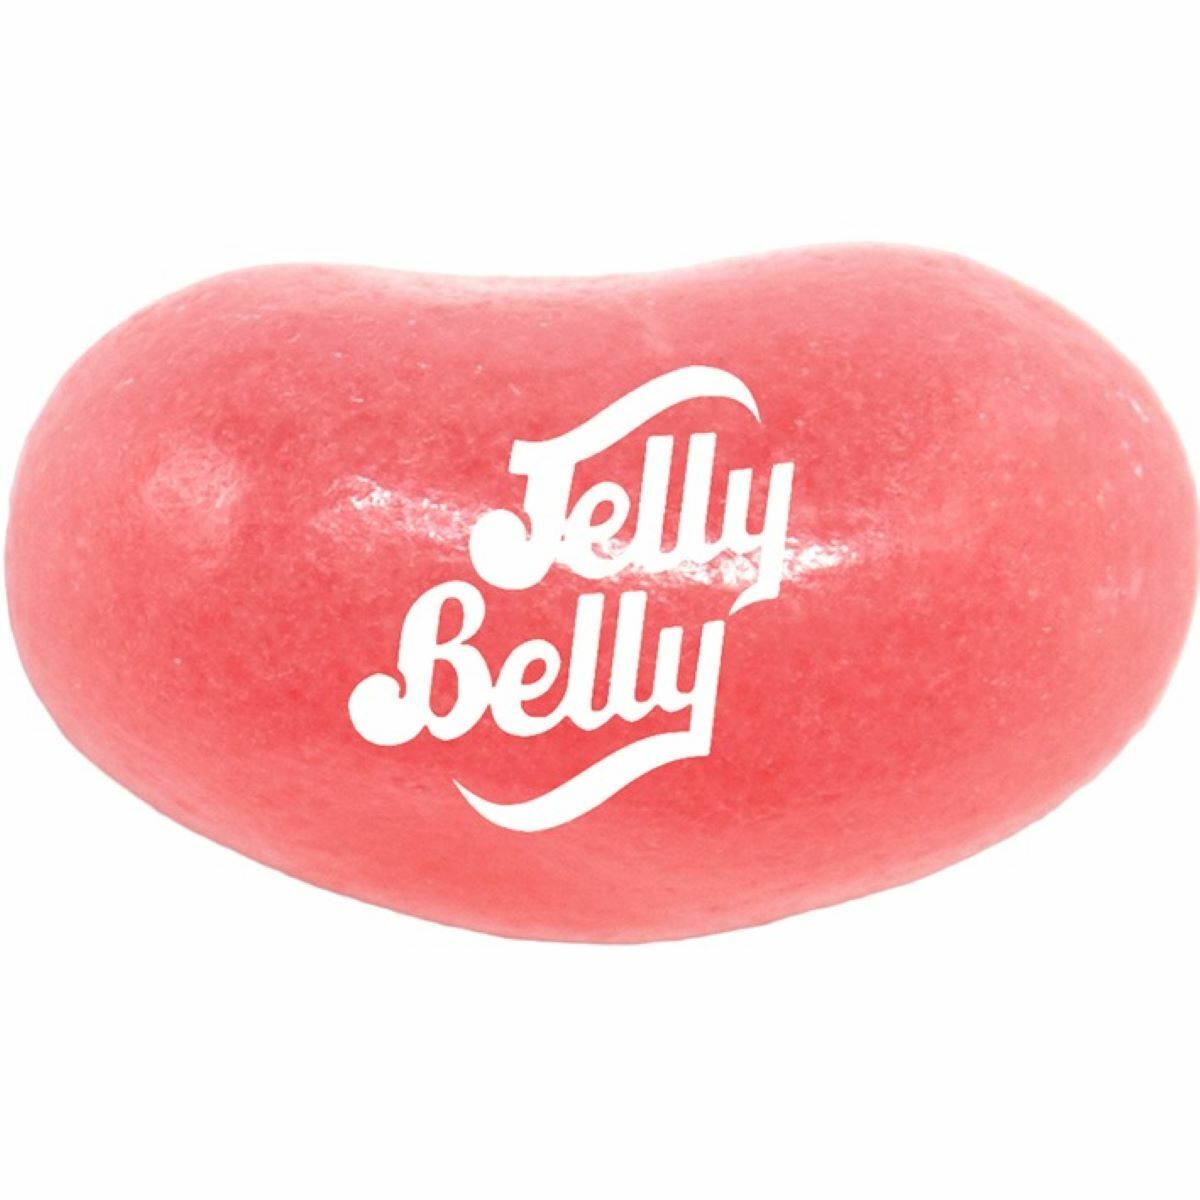 Cotton Candy Jelly Beans Bag